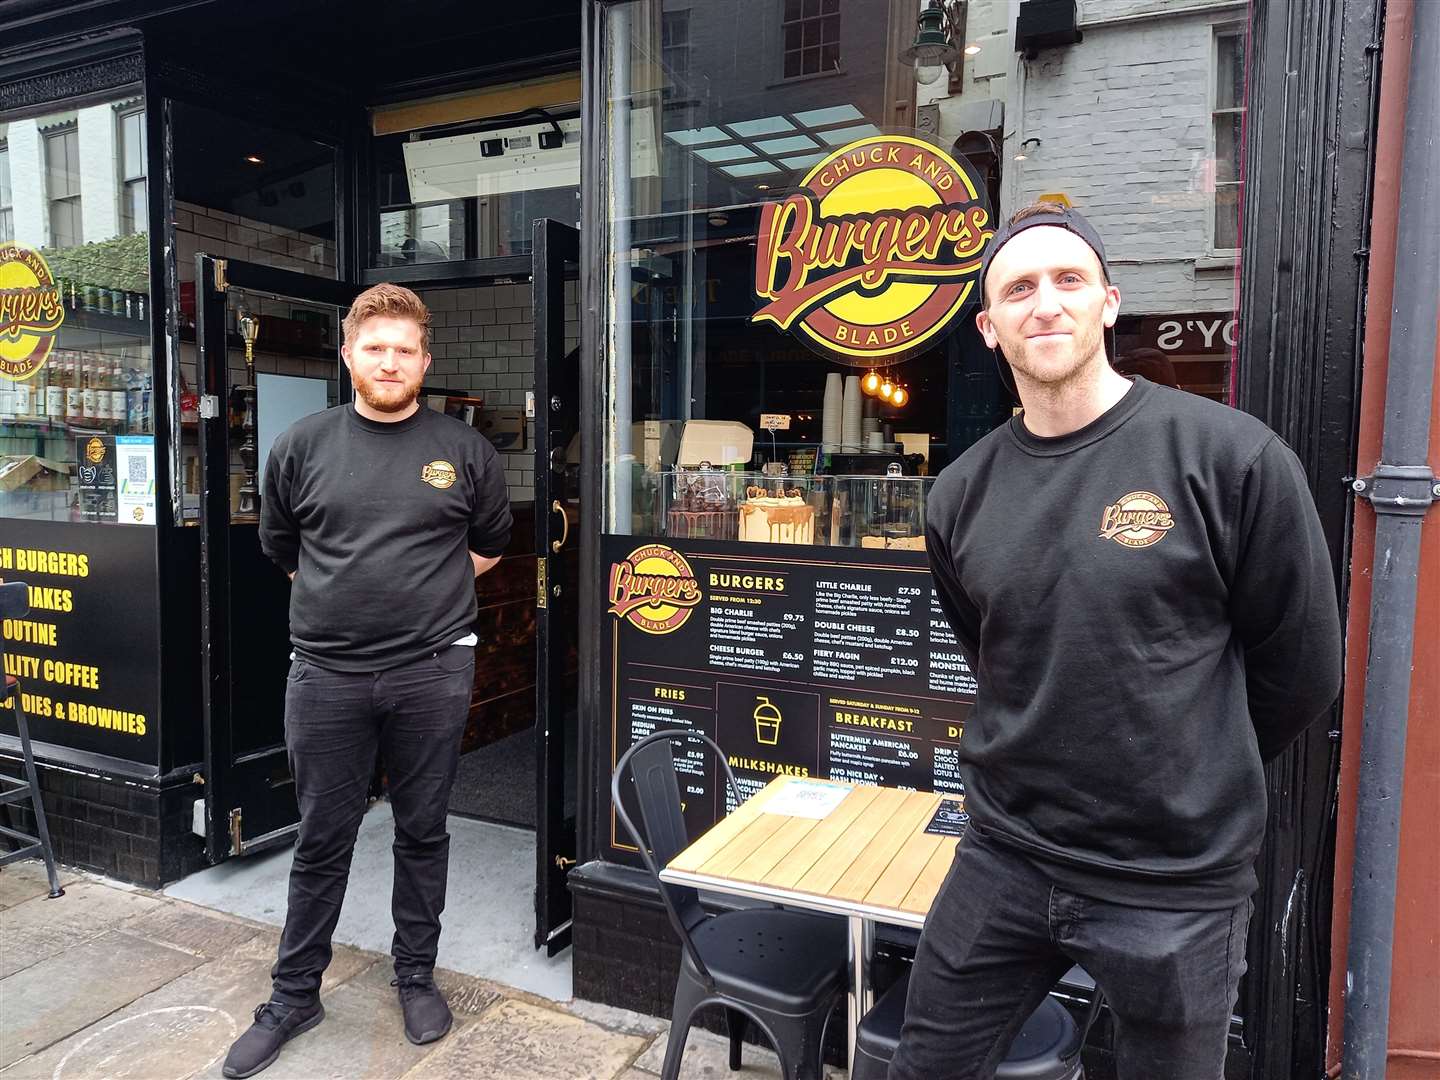 Chuck and Blade Burgers will open a branch in Tunbridge Wells